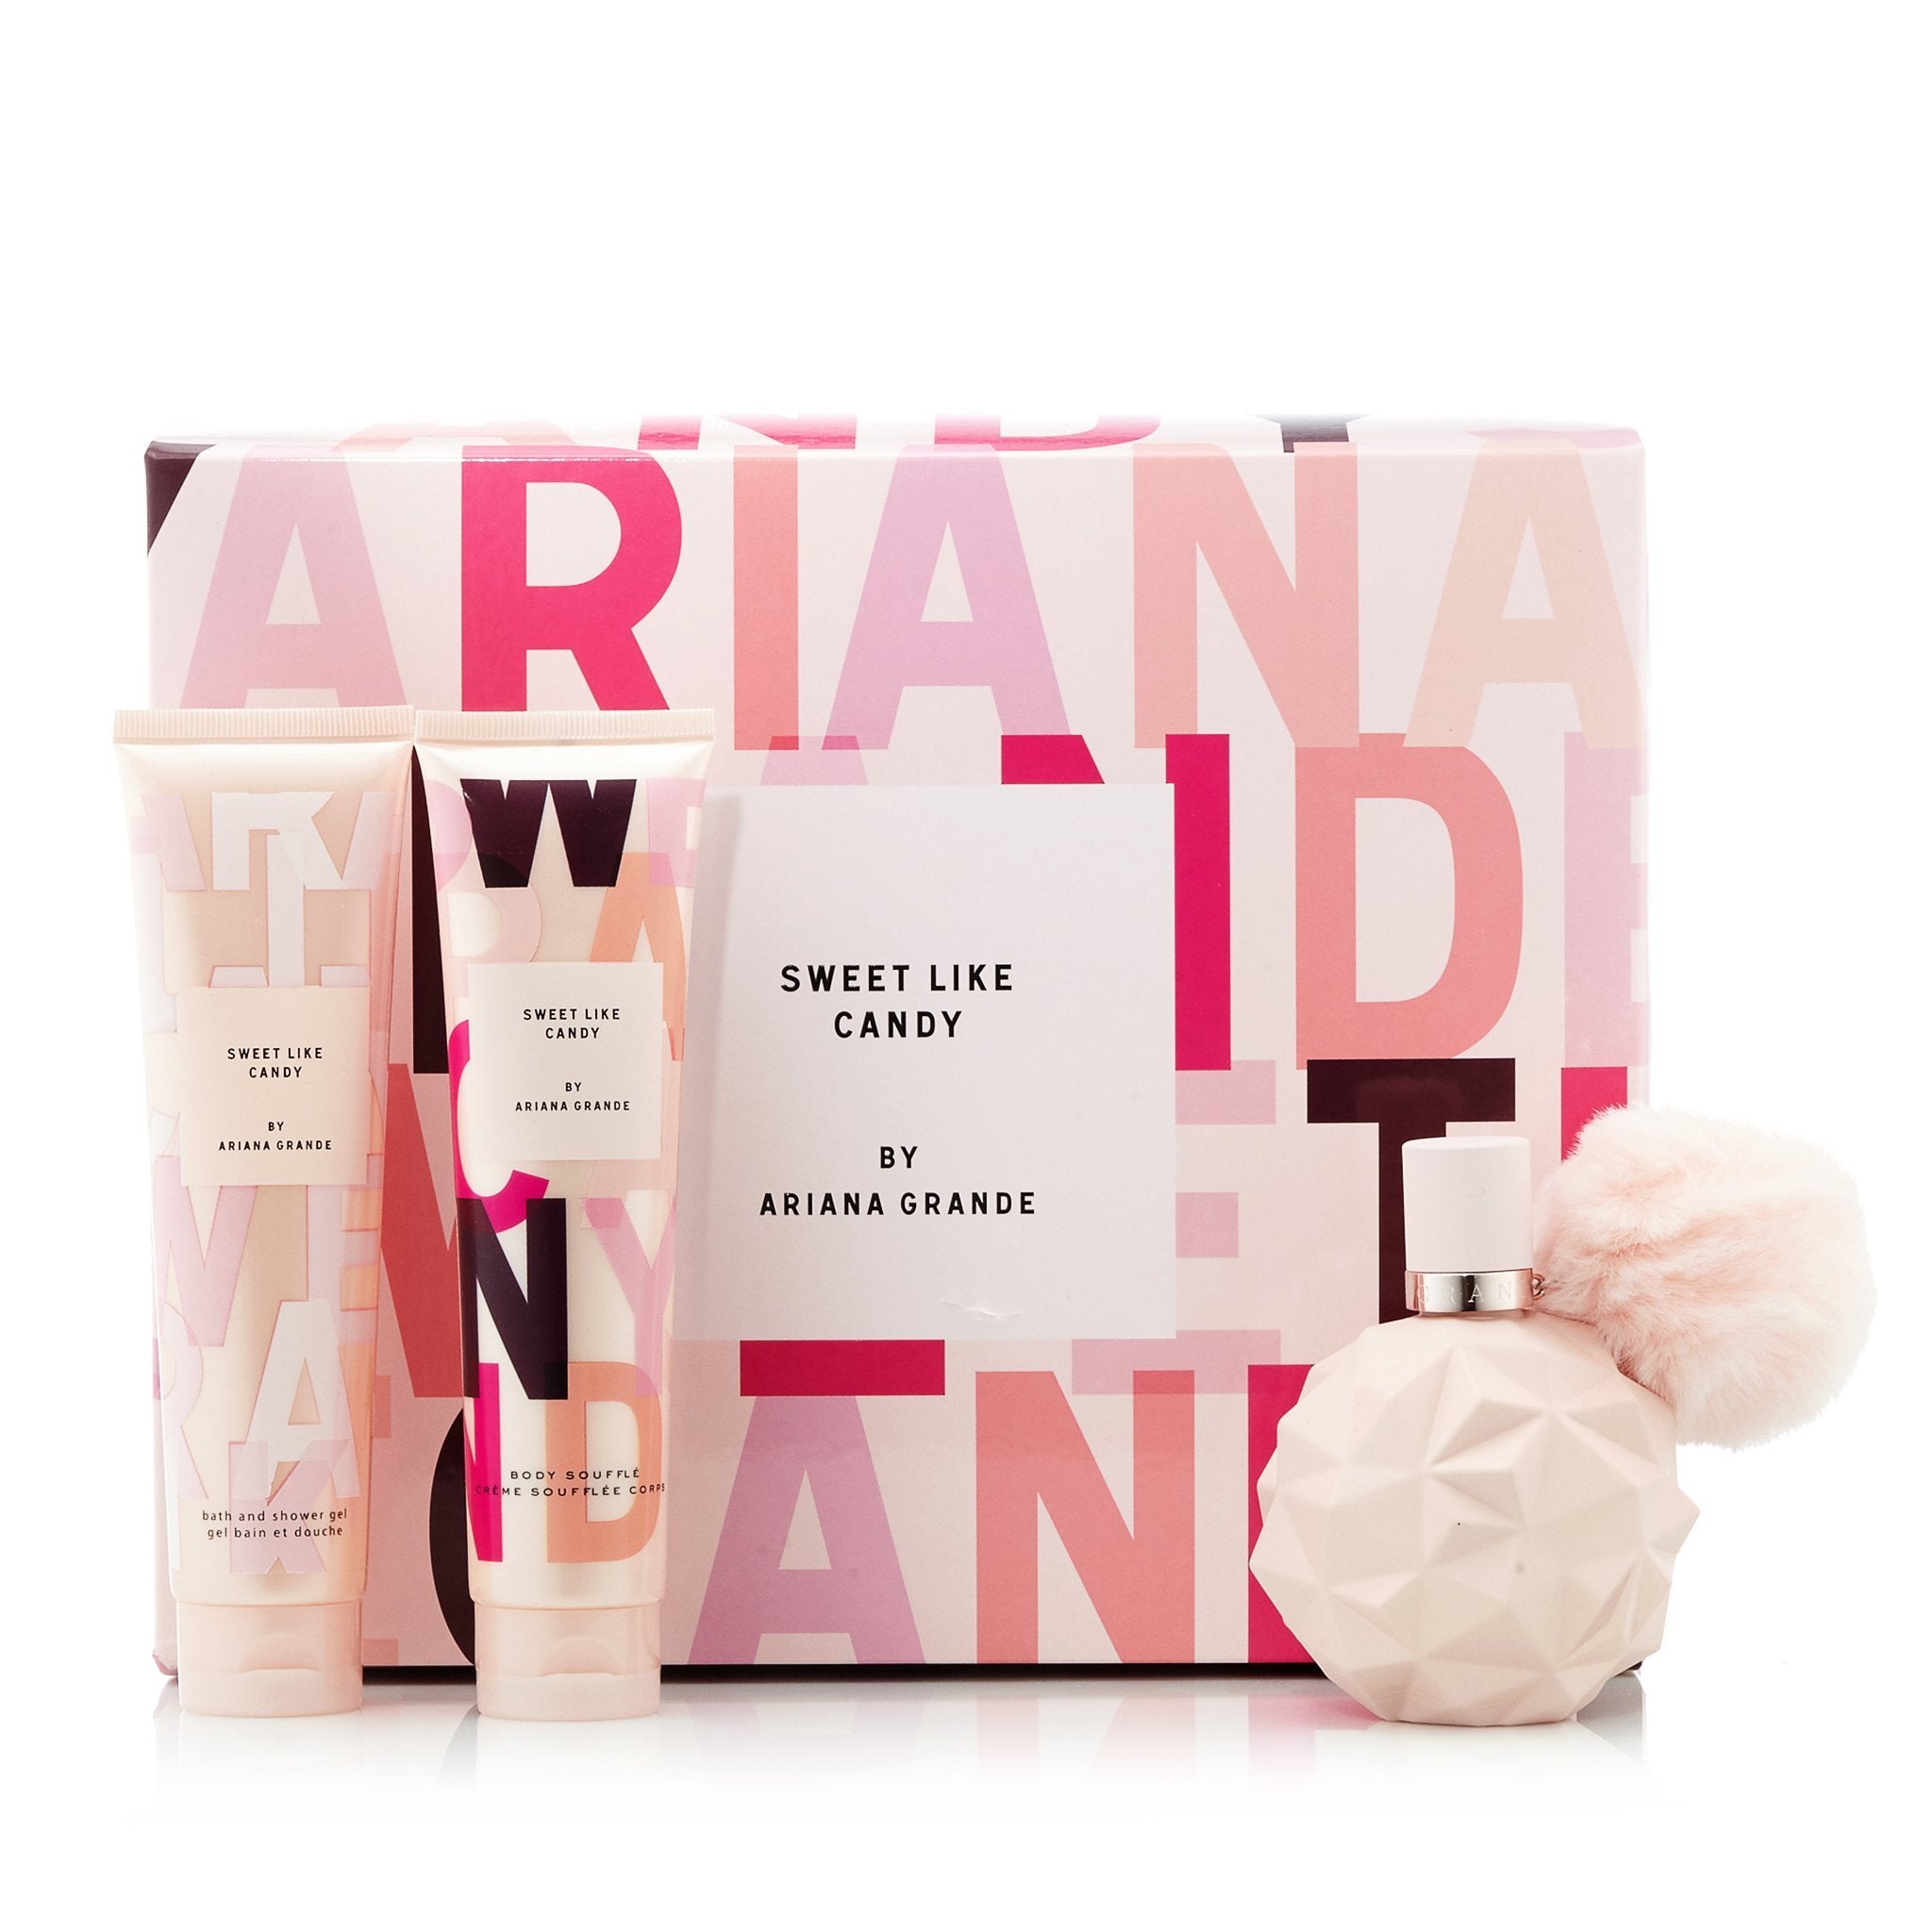 Sweet Like Candy by Ariana Grande Bath and Shower Gel (unboxed) 3.4 oz